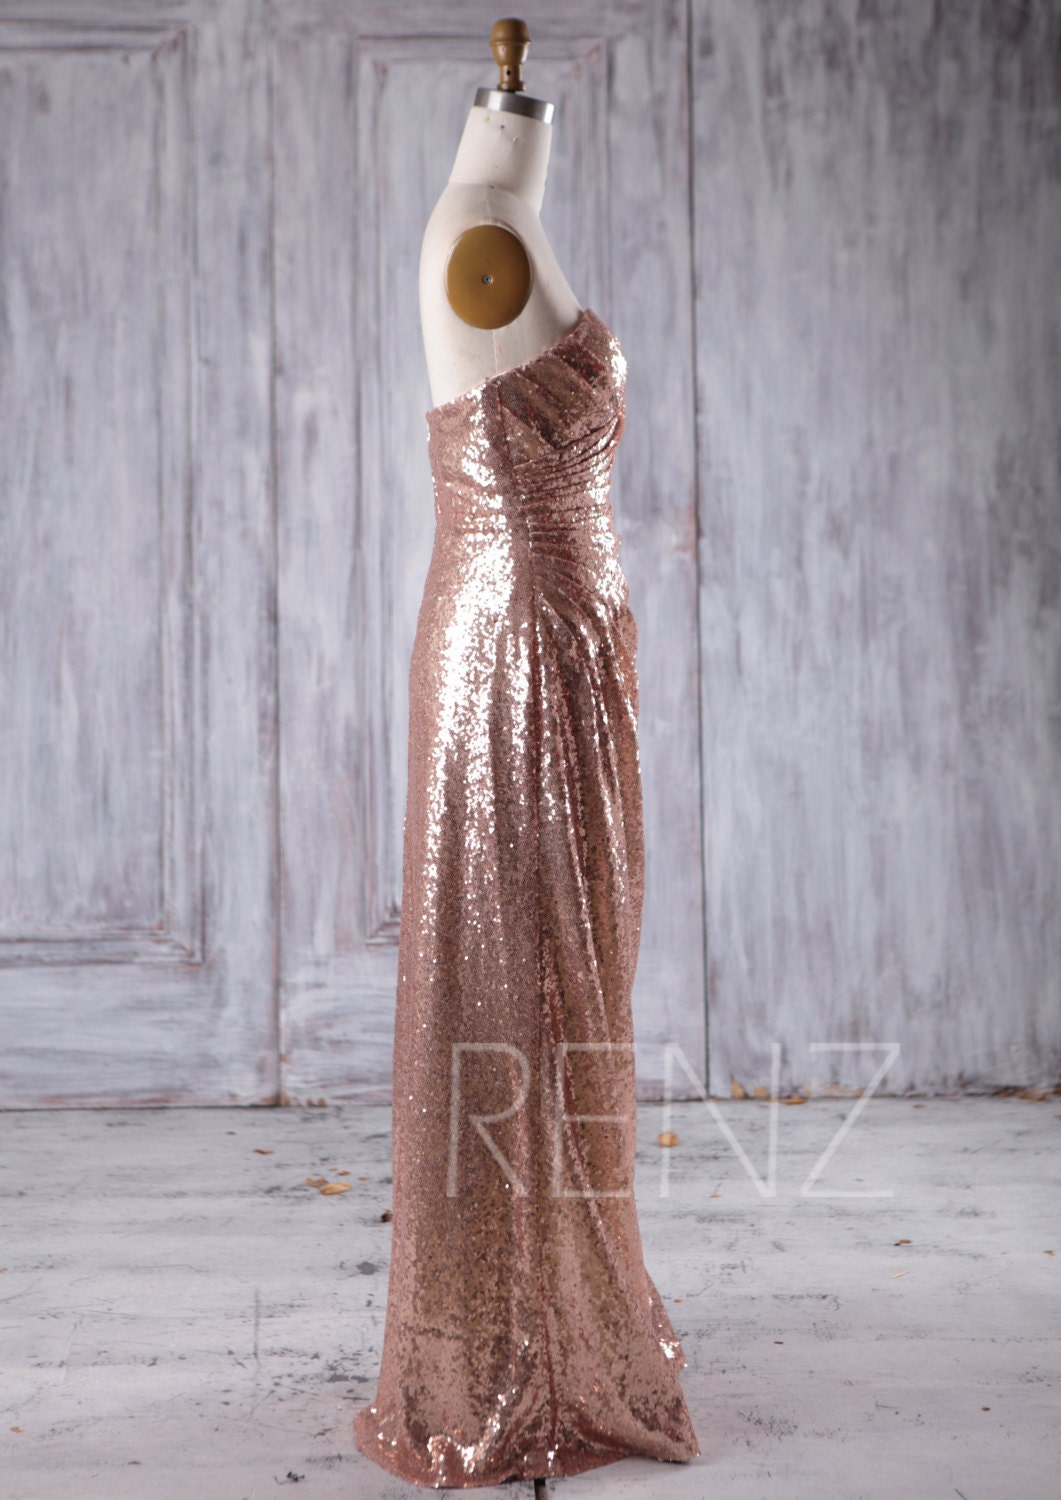 Party Dress Rose Gold Sequin Evening Dress Ruched Sweetheart | Etsy